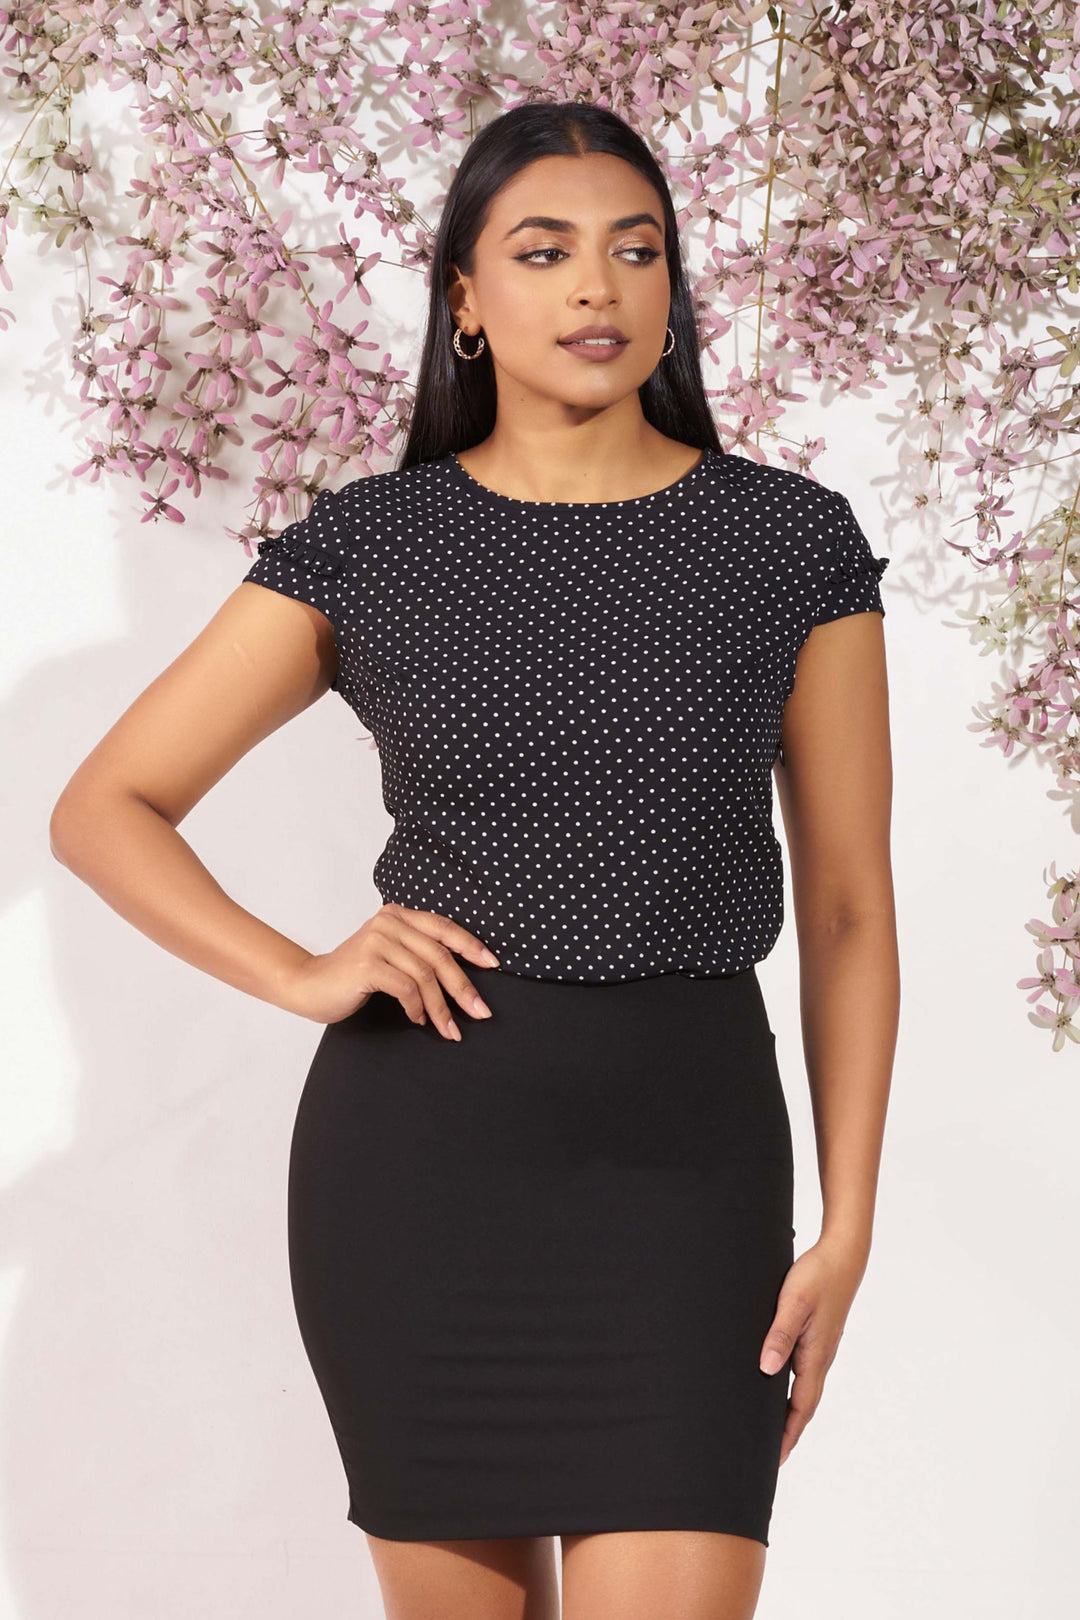 Polka Dot Round Neck Top - Slim Fit, Top, New Arrivals, Office Tops, Round Neck, SH21, Short Sleeves, Smart Casual, Smart Casual Top, Work Top, workwear - MONDY, Sri Lankan women's clothing o